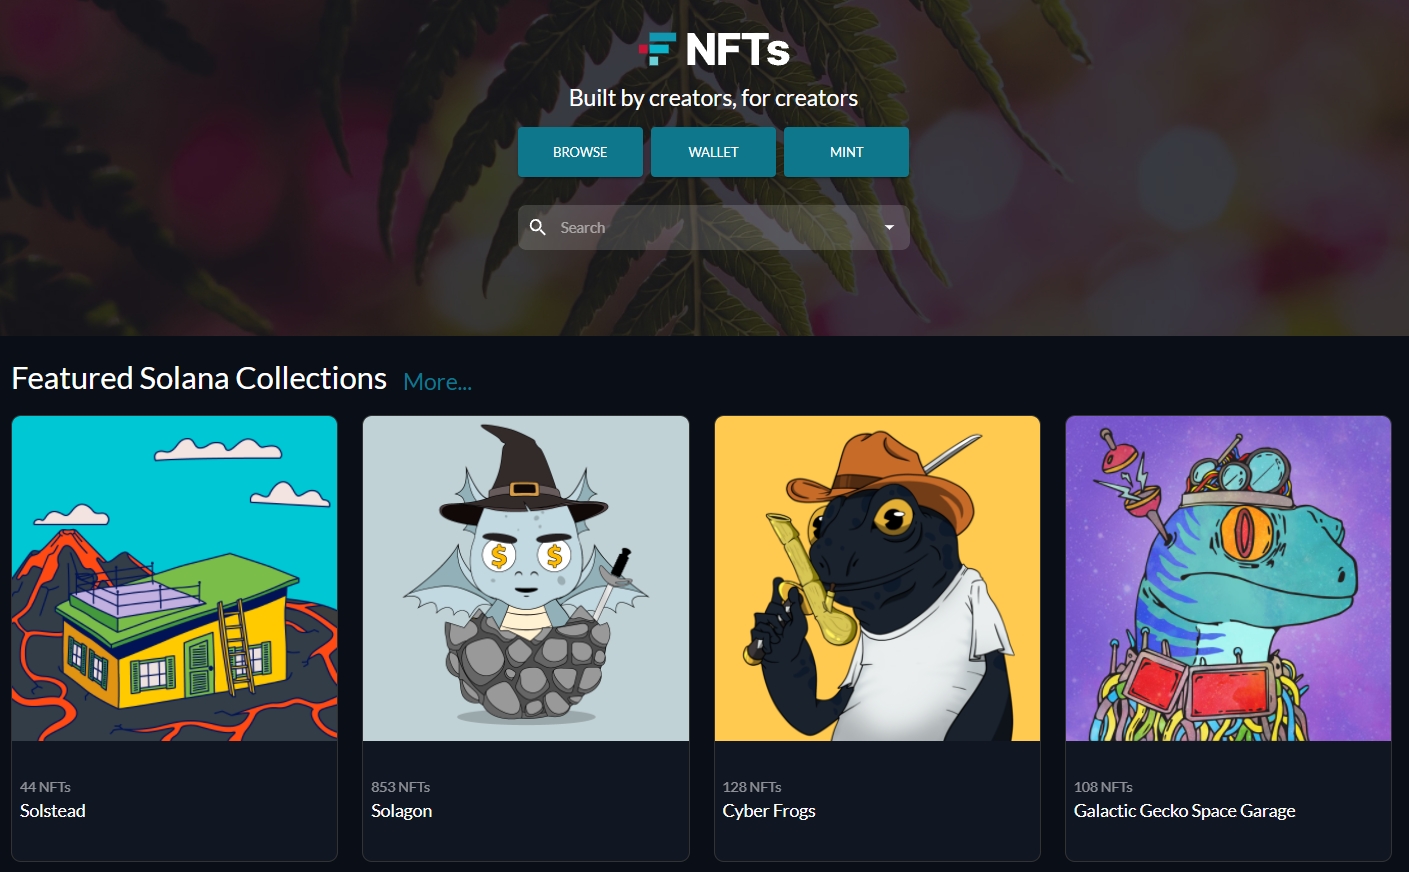 FTXUS Expands Market Offering Now Supports Solana Based NFTs CoinCheckup FTX.US Expands Market Offering, Now Supports Solana-Based NFTs - CoinCheckup Blog